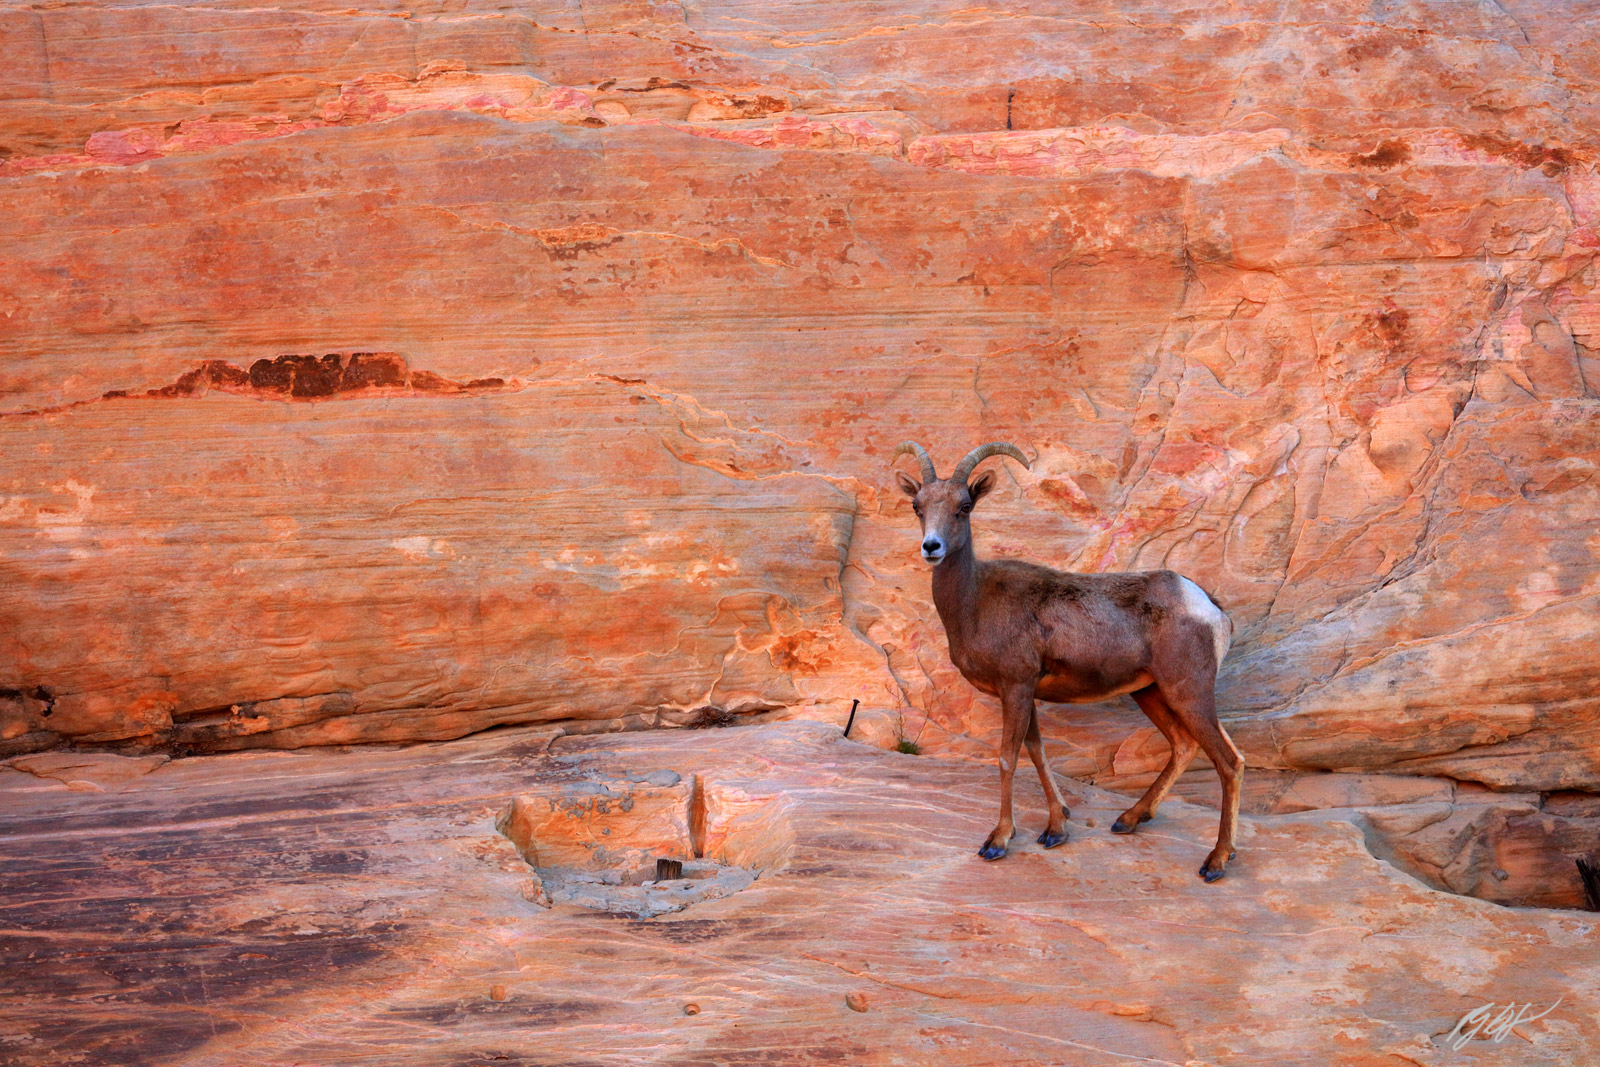 Big Horn sheep in Valley of Fire State Park in Nevada